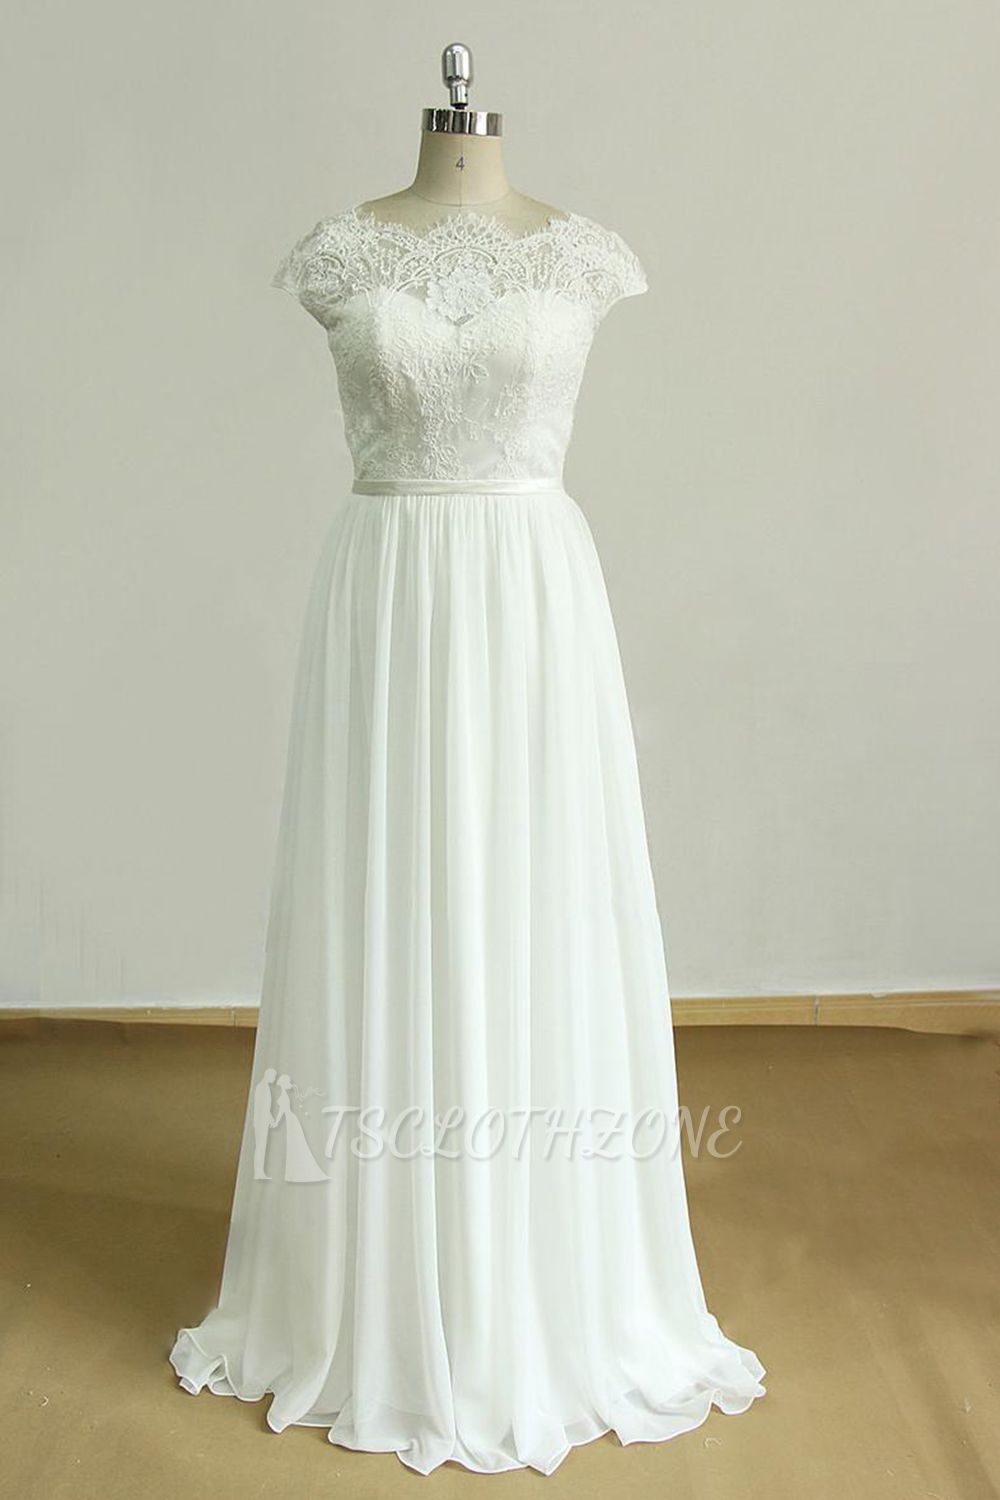 Gorgeous Appliques Chiffon Wedding Dress | White Shortsleeves A-line Bridal Gowns